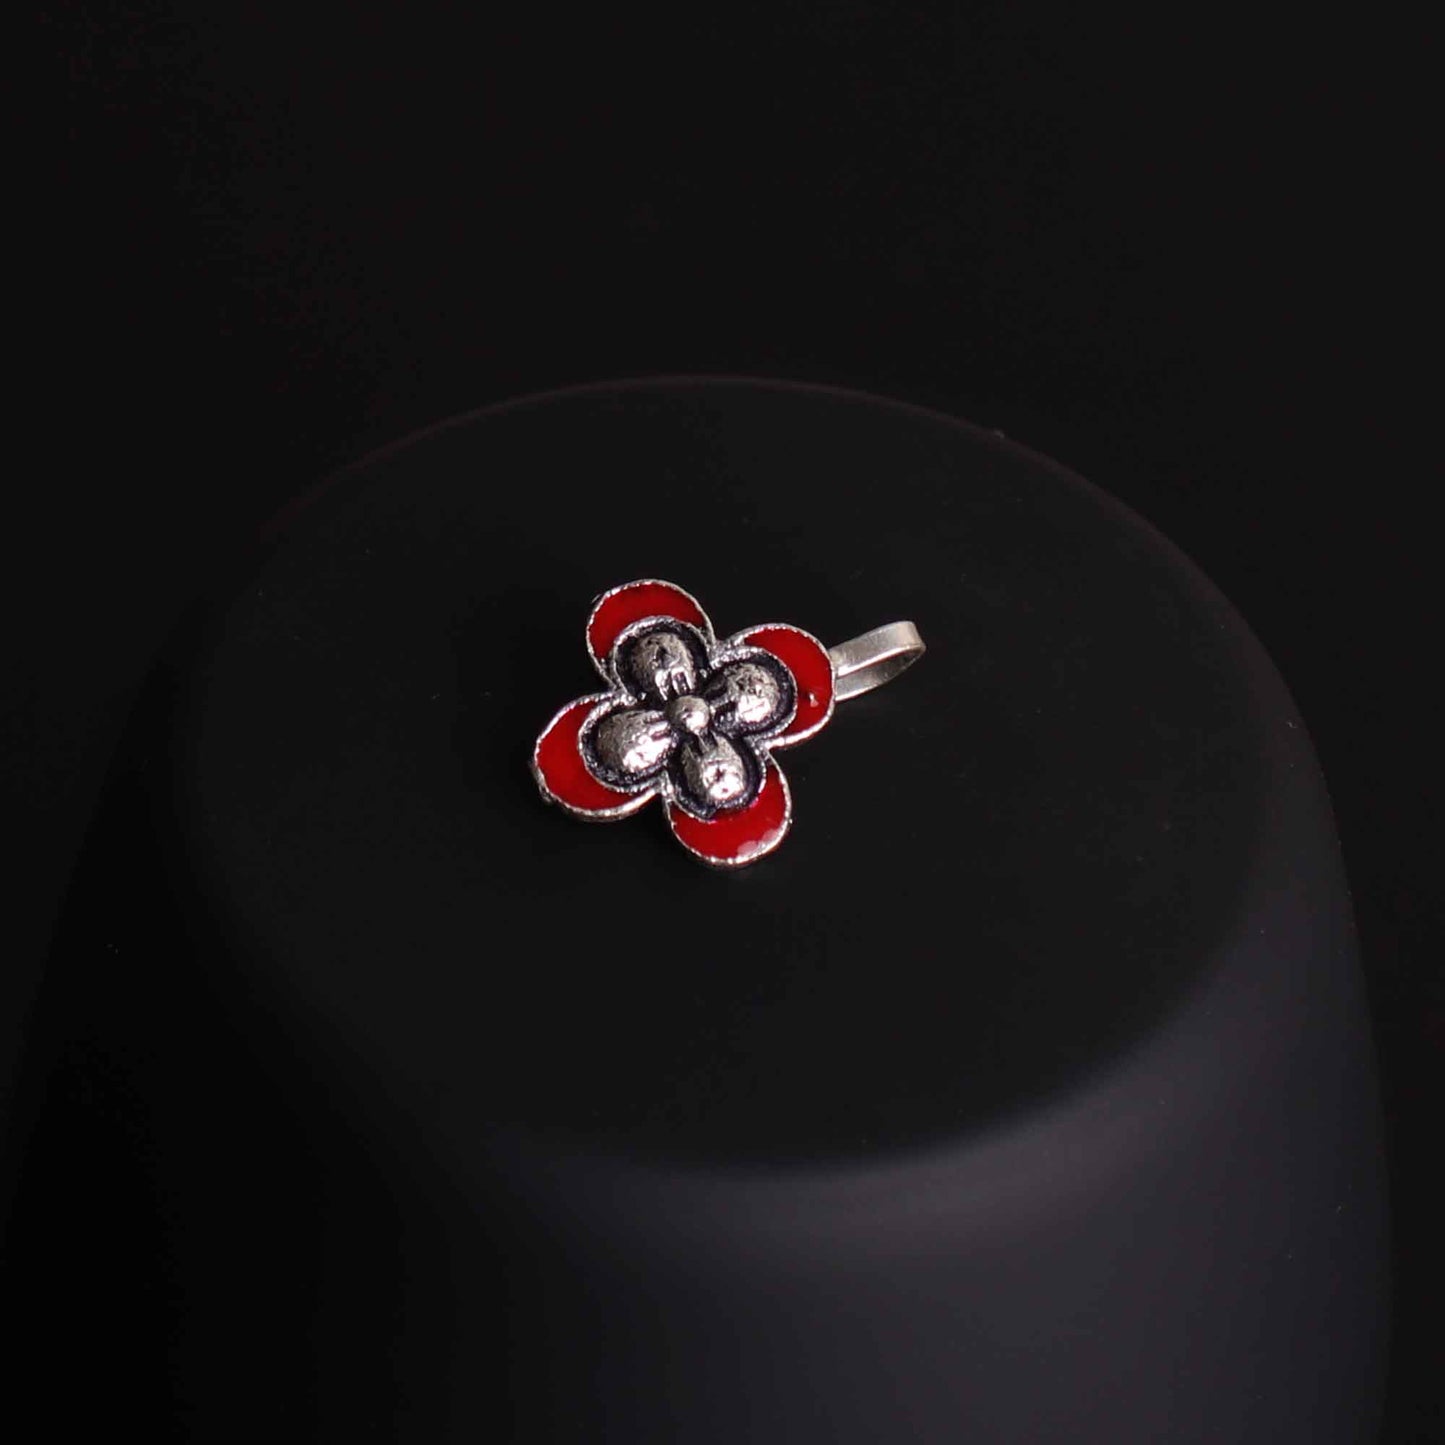 Nose Pin,The Butterfly Nose Pin in Red - Cippele Multi Store